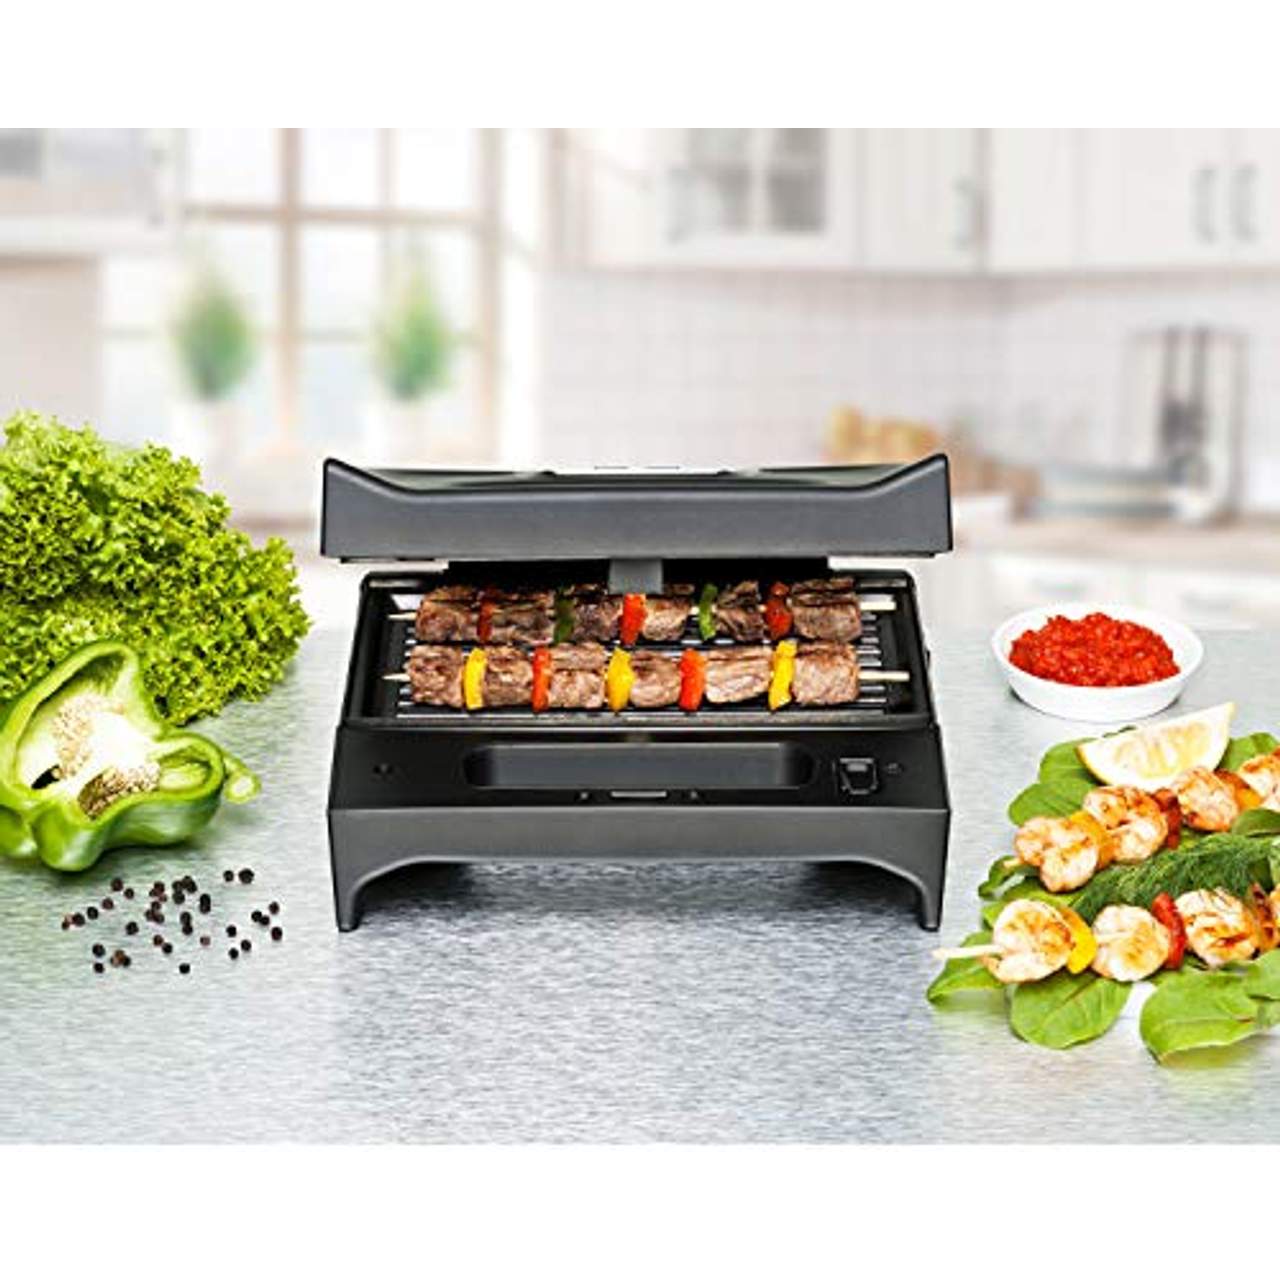 Rommelsbacher SWG 700 3-in-1 Multi Toast & Grill Max